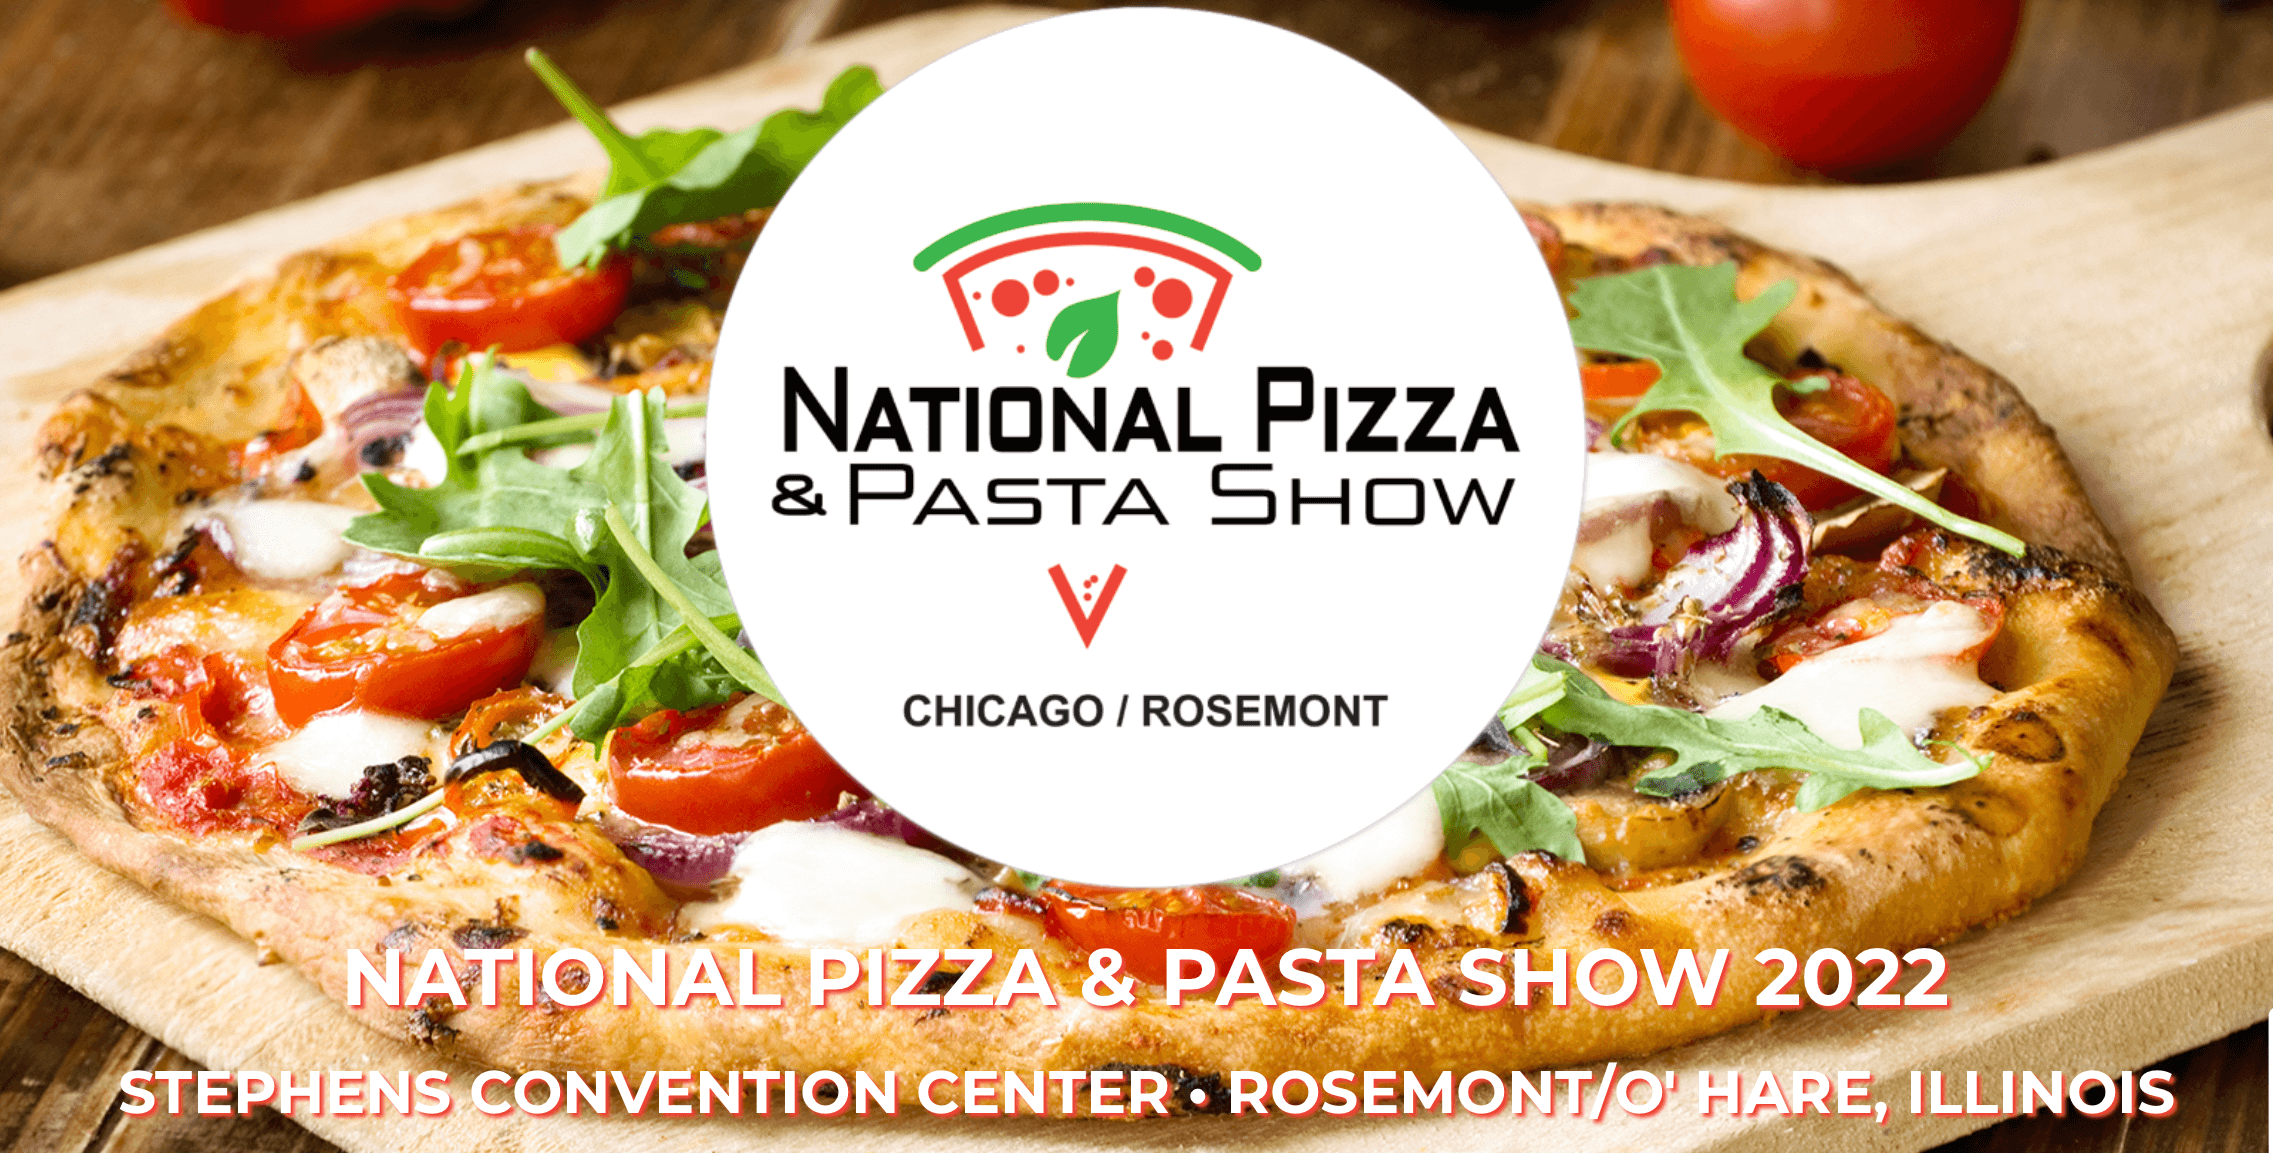 National pizza and pasta show chicago